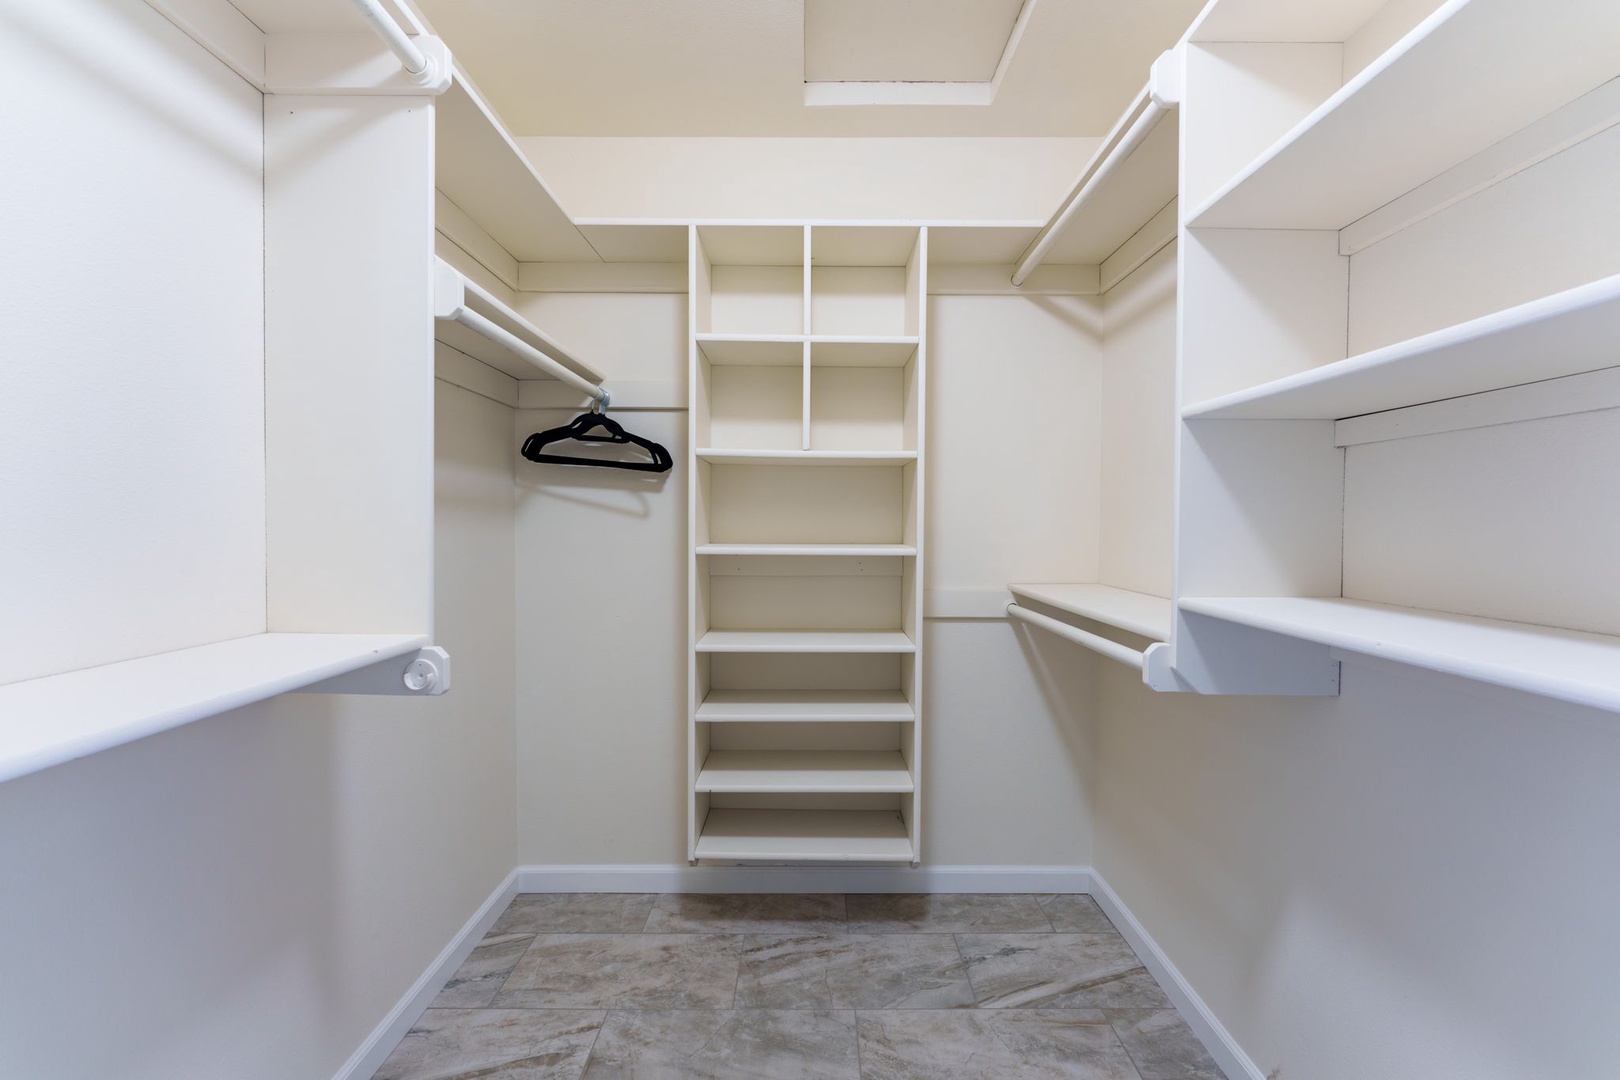 The Master Suite boasts an oversized walk-in closet with plenty of space to keep bags tucked away